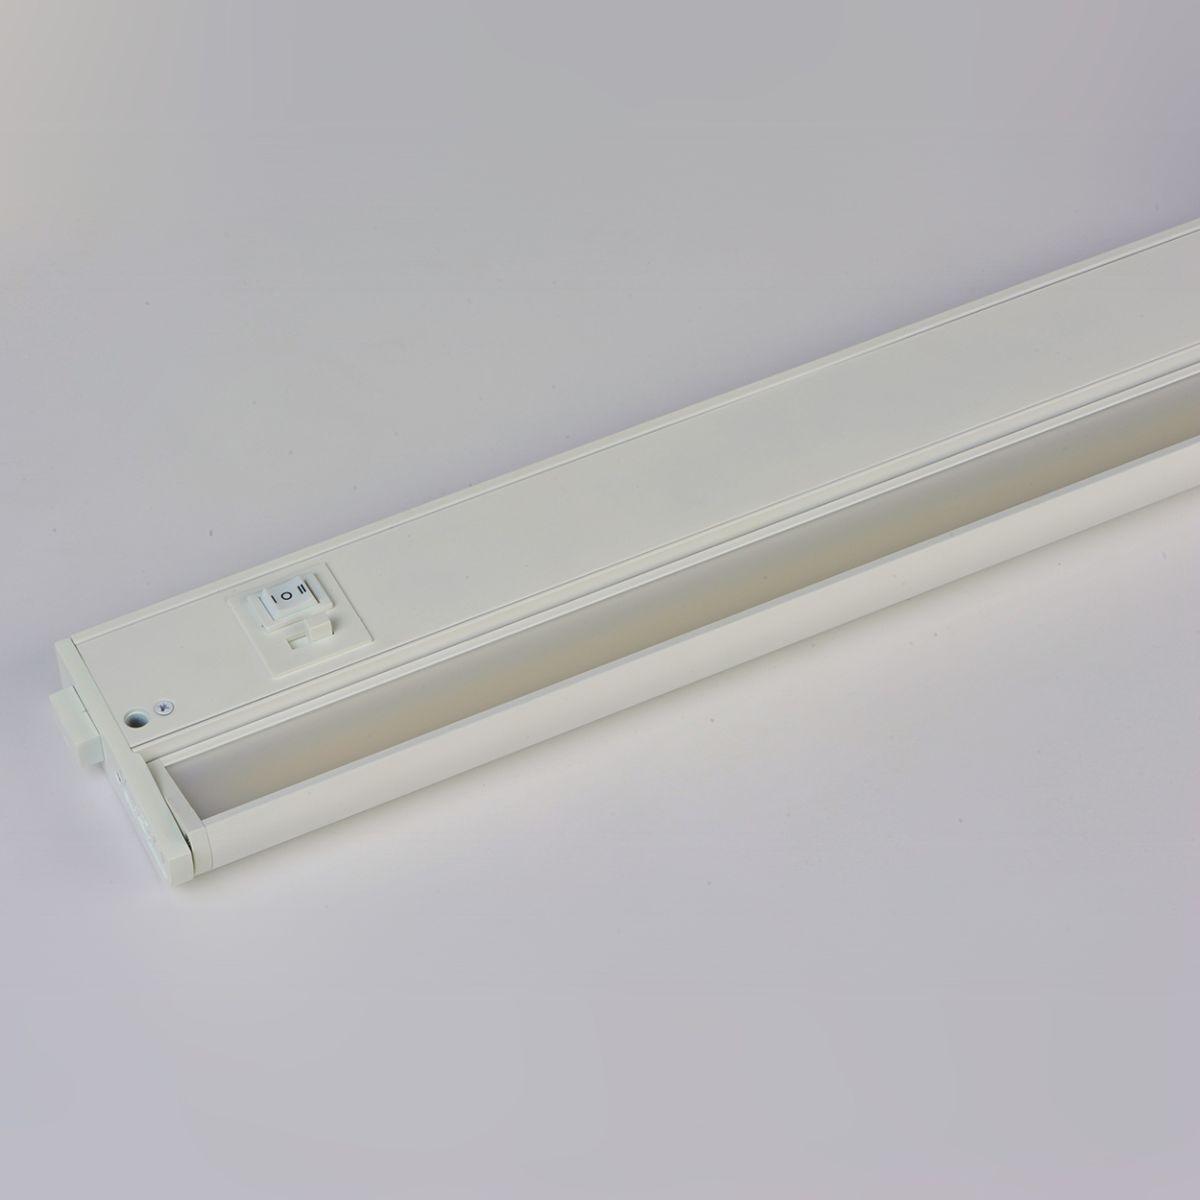 CounterMax 5K 30 Inch Under Cabinet LED Light with Patent gimbals, 1800 Lumens, Linkable, CCT Selectable 2700K to 5000K, 120V - Bees Lighting